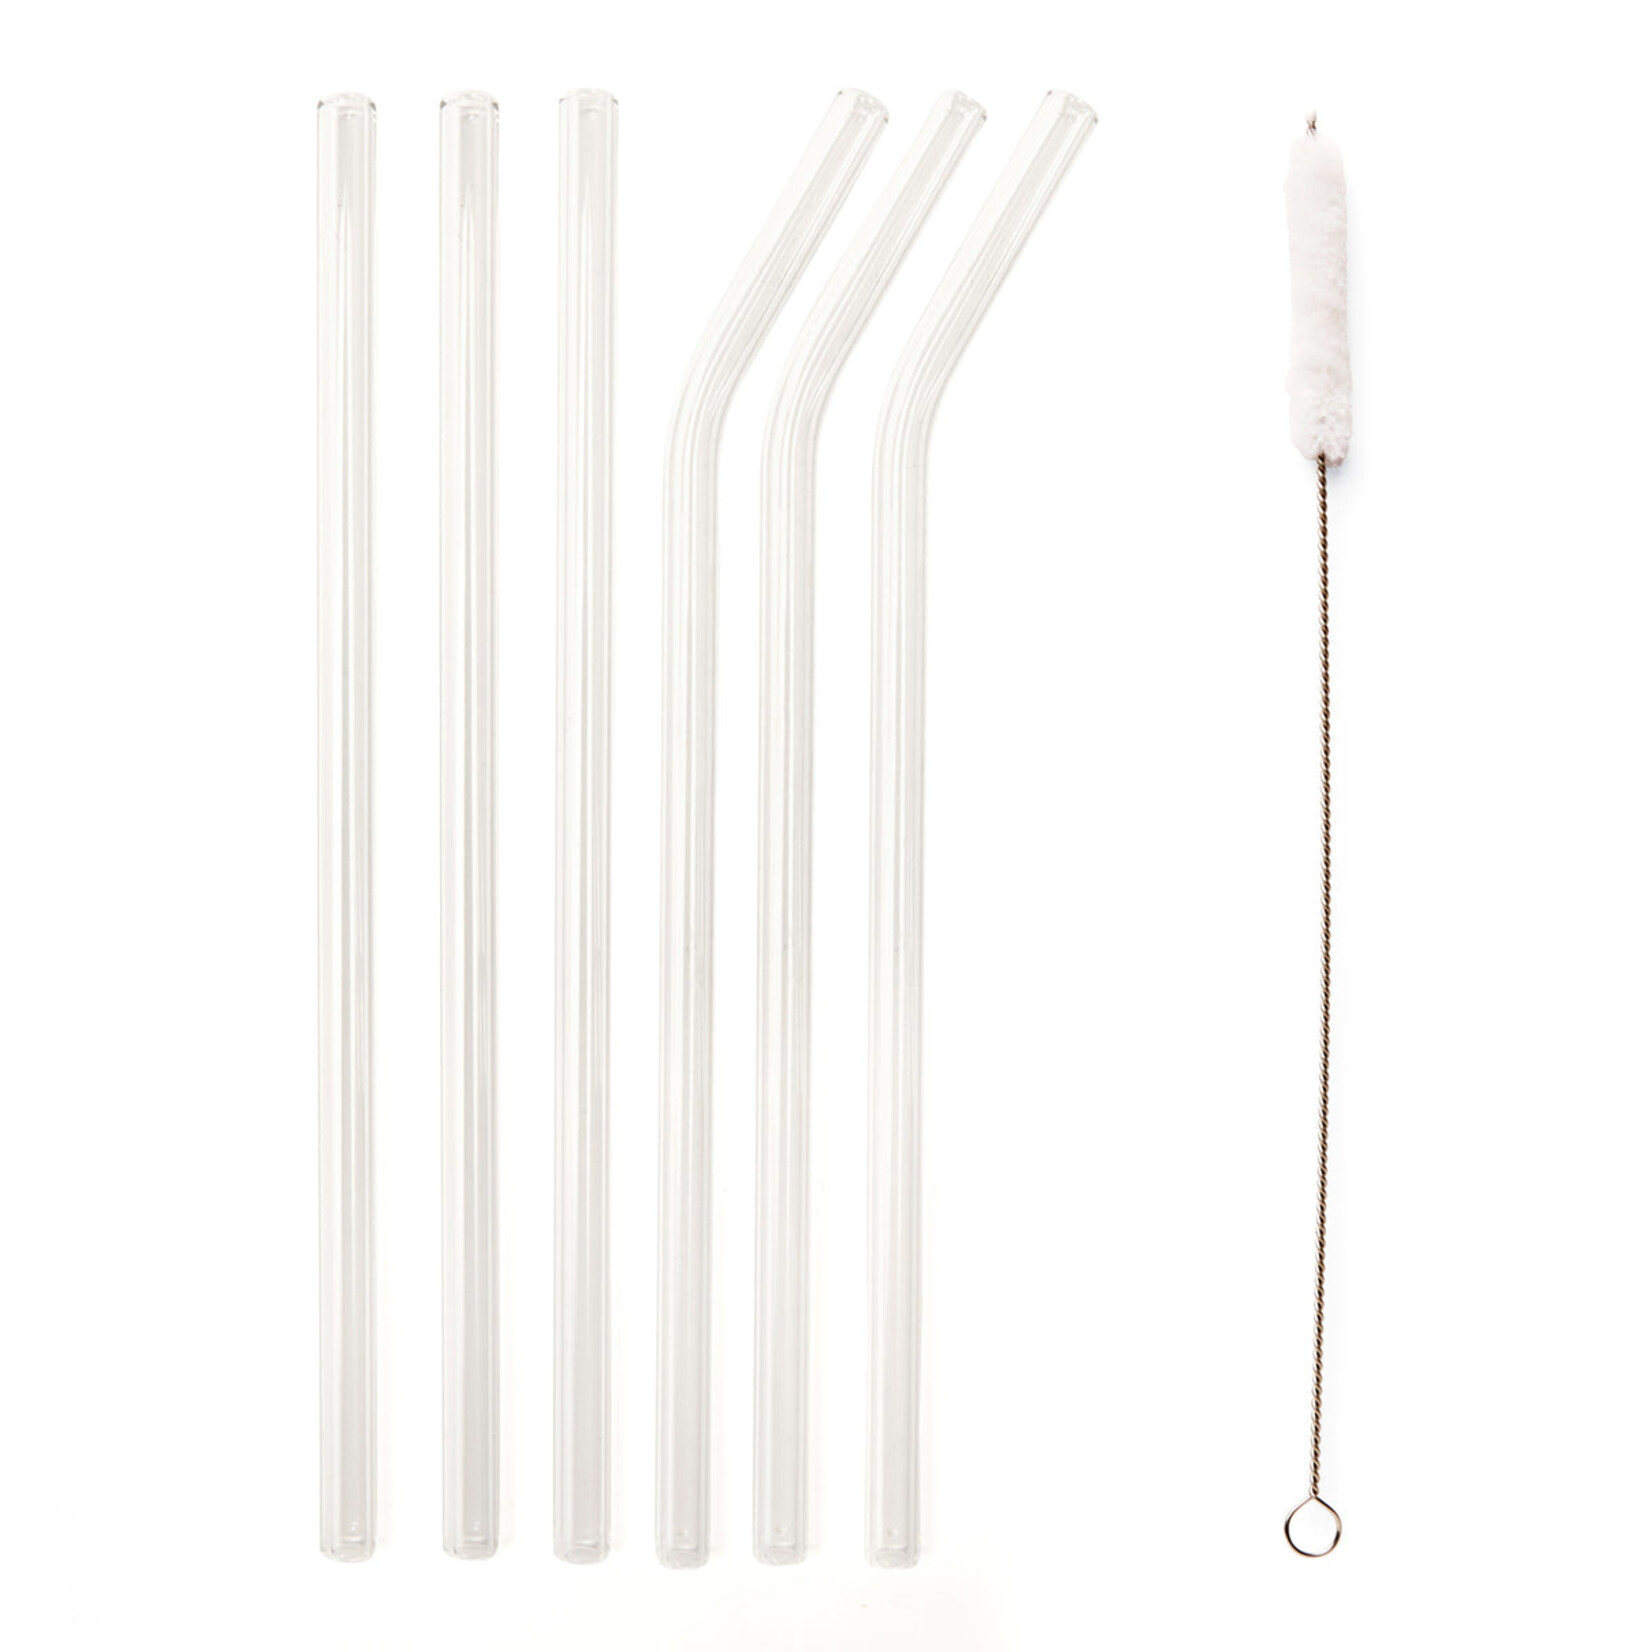 CLEAR REUSABLE GLASS STRAWS